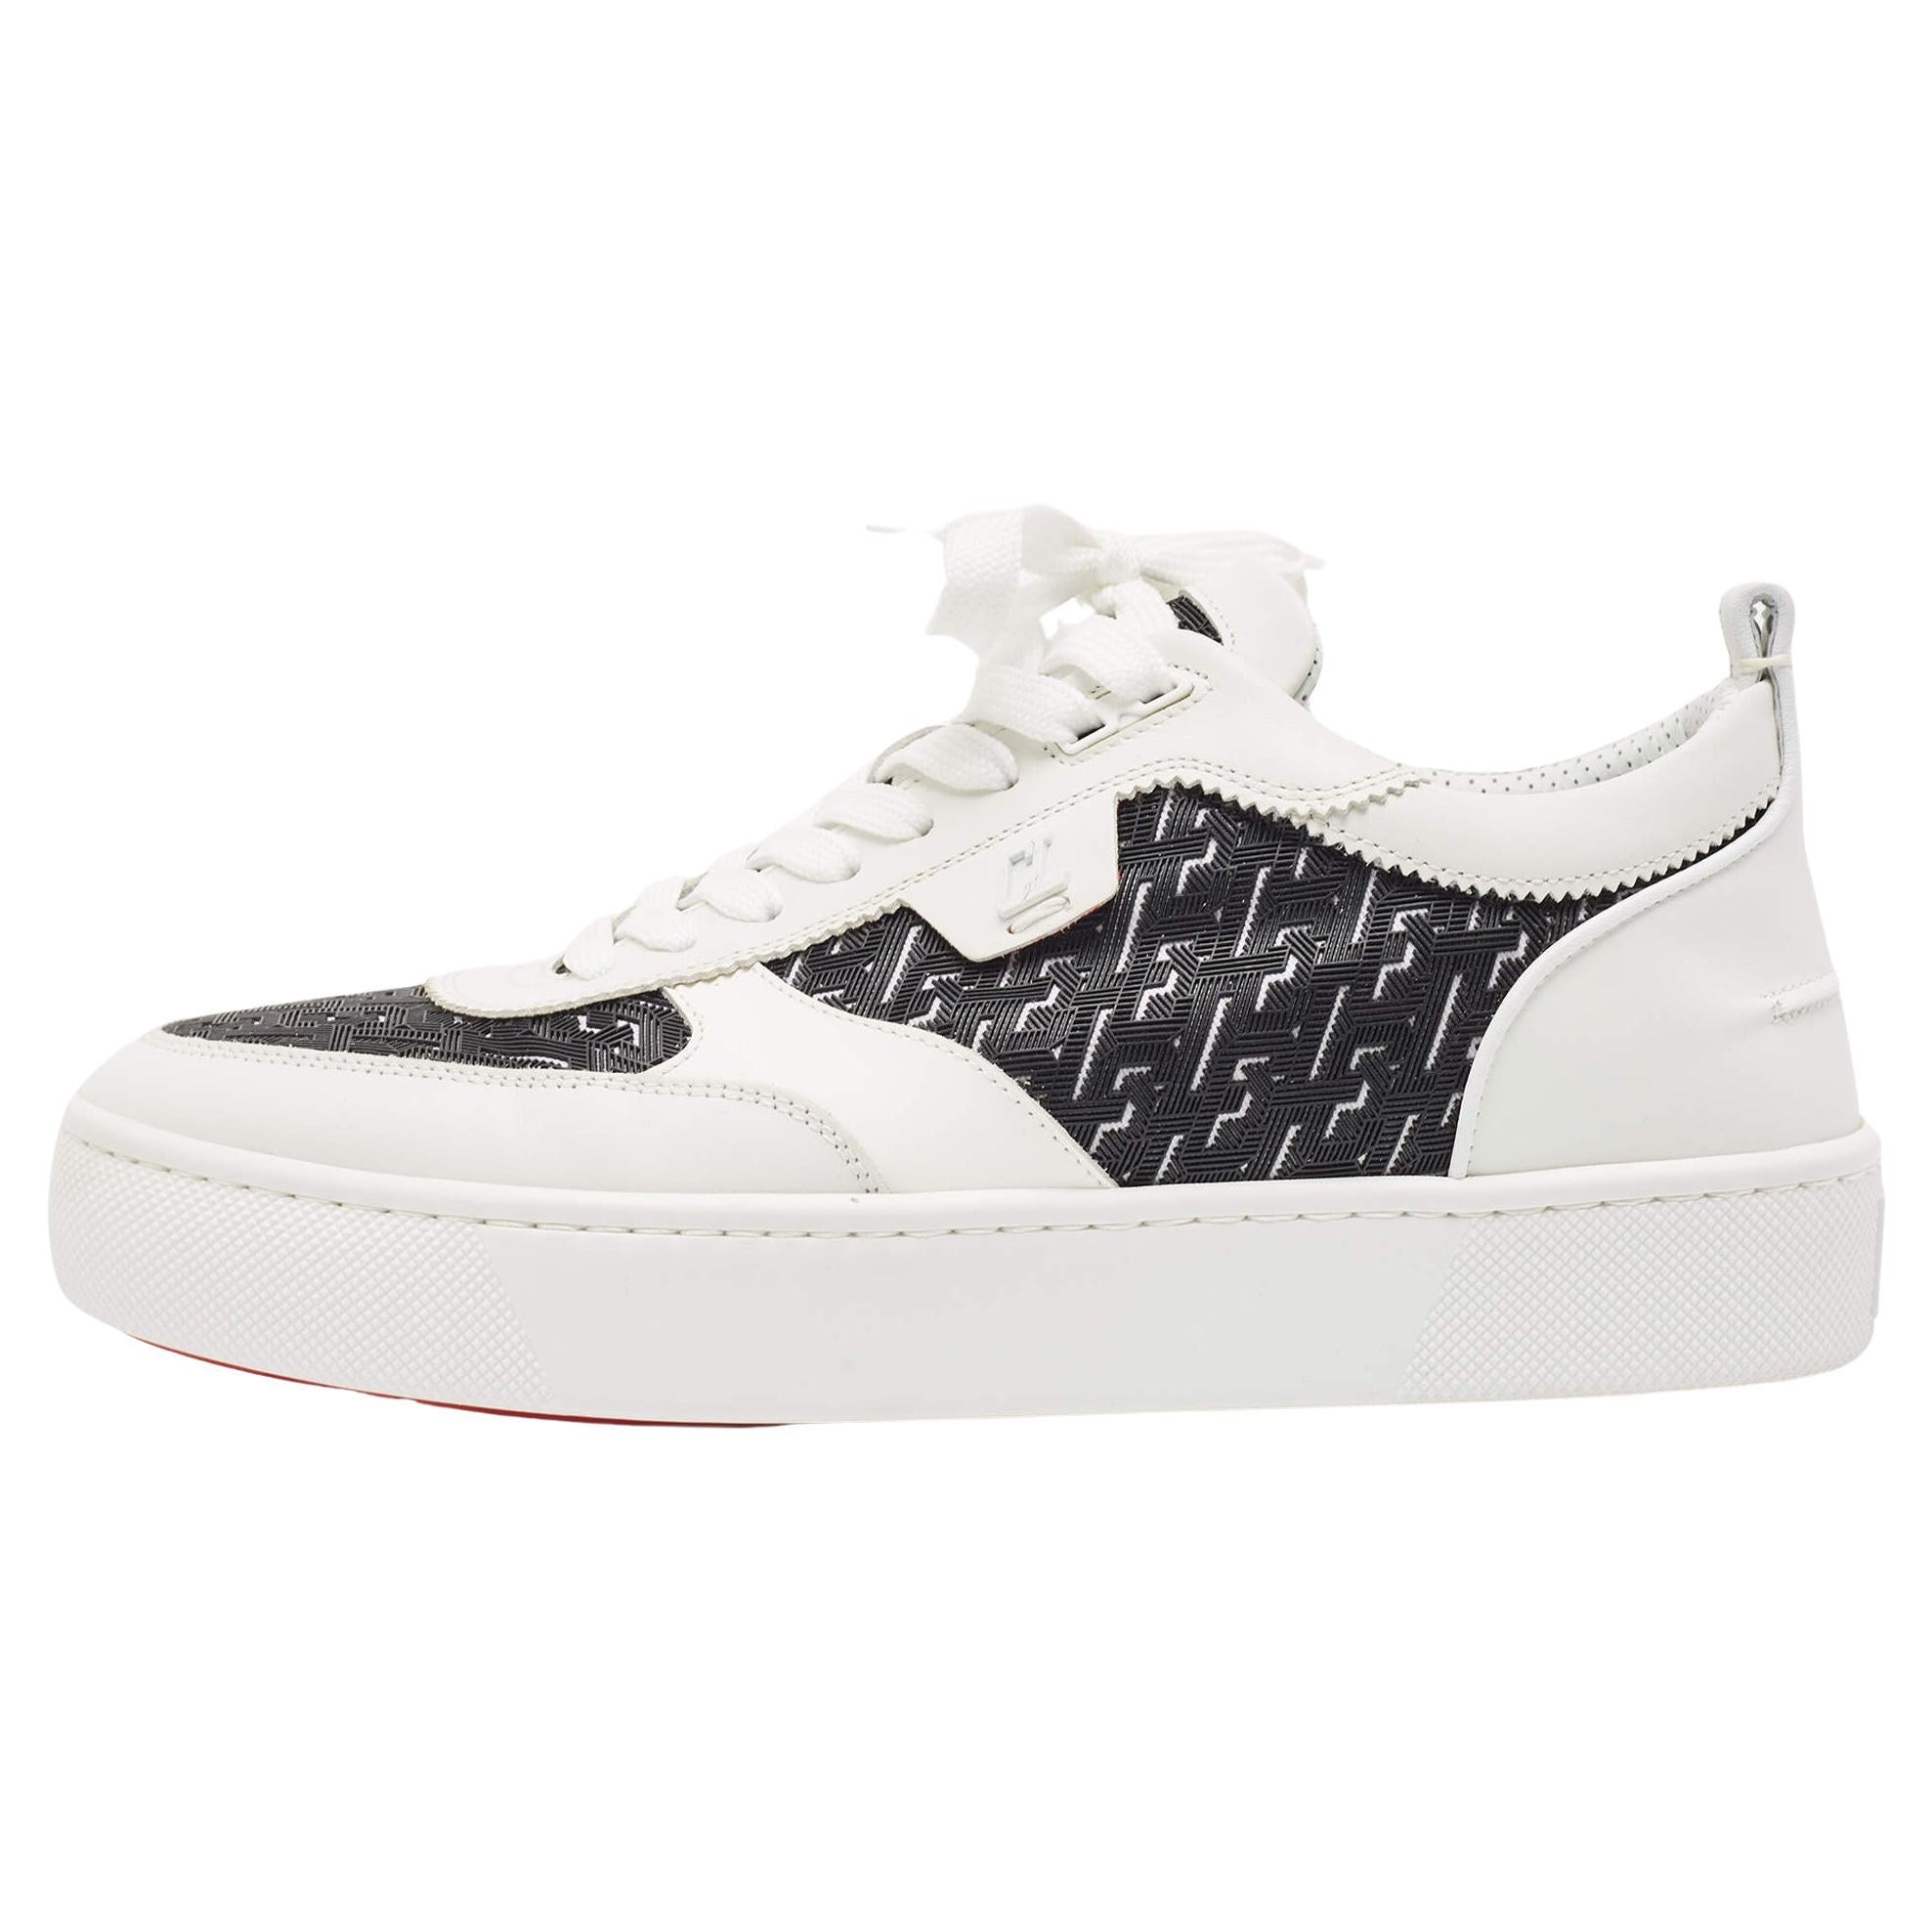 Christian Louboutin White/Black Leather and Rubber Happyrui Sneakers Size 42